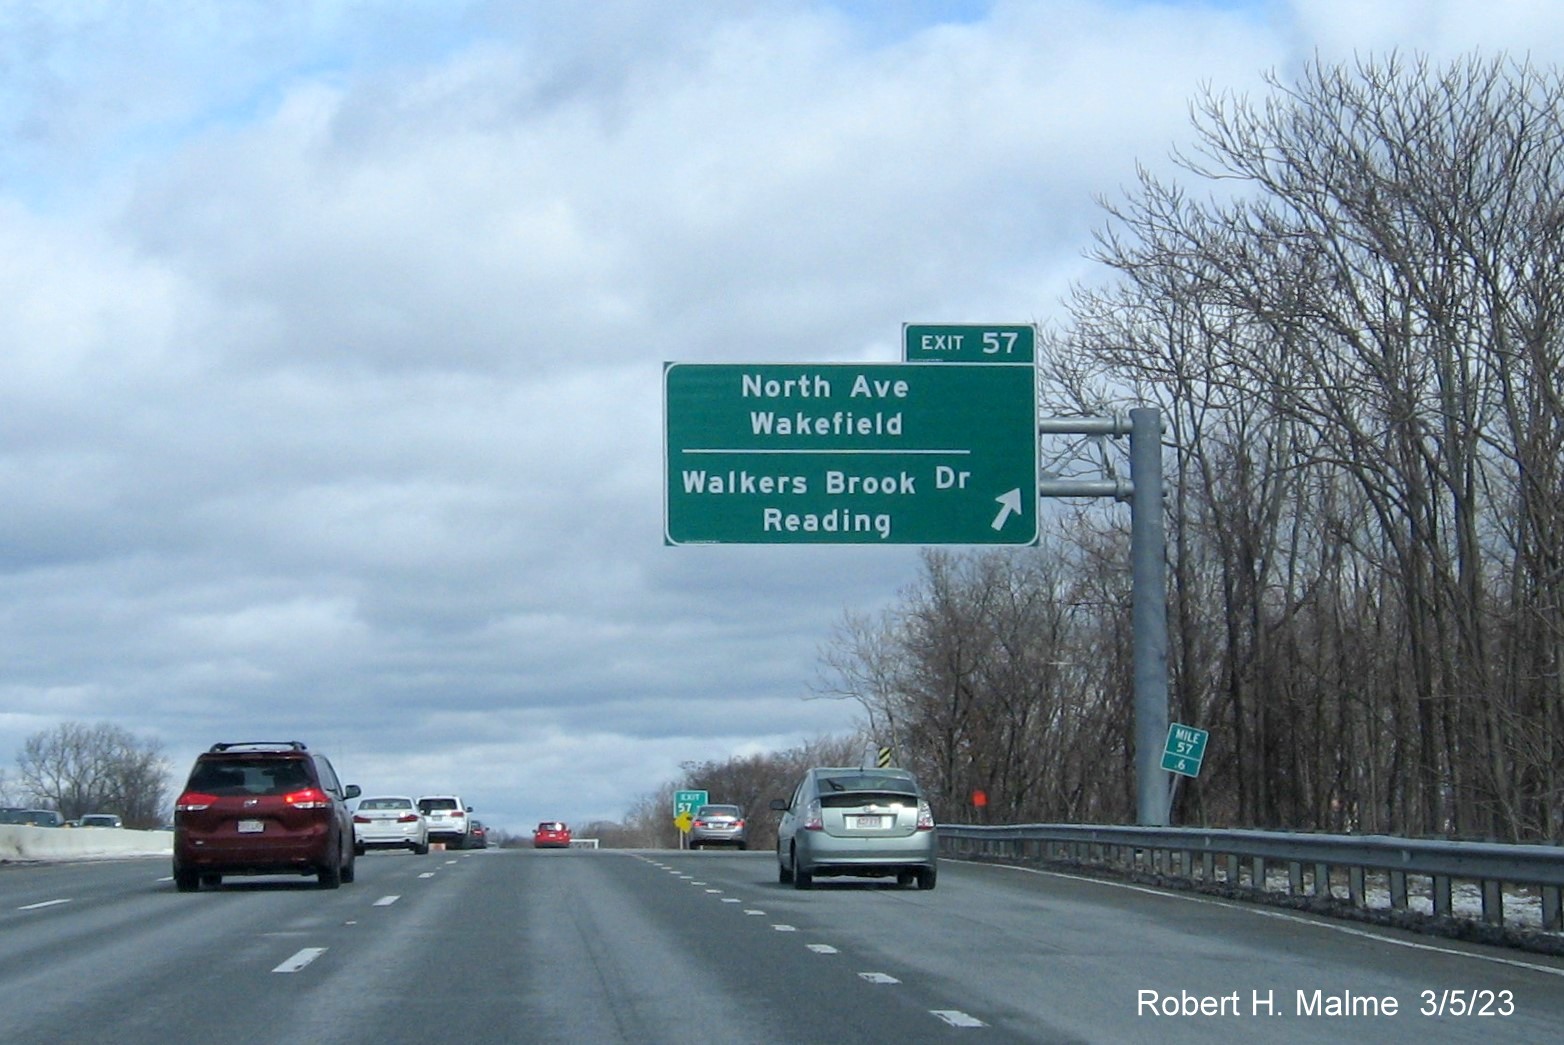 Image of recently placed overhead ramp sign for North Avenue/Walkers Brook Drive exit on
                                     I-95/MA 128 North in Wakefield, March 2023